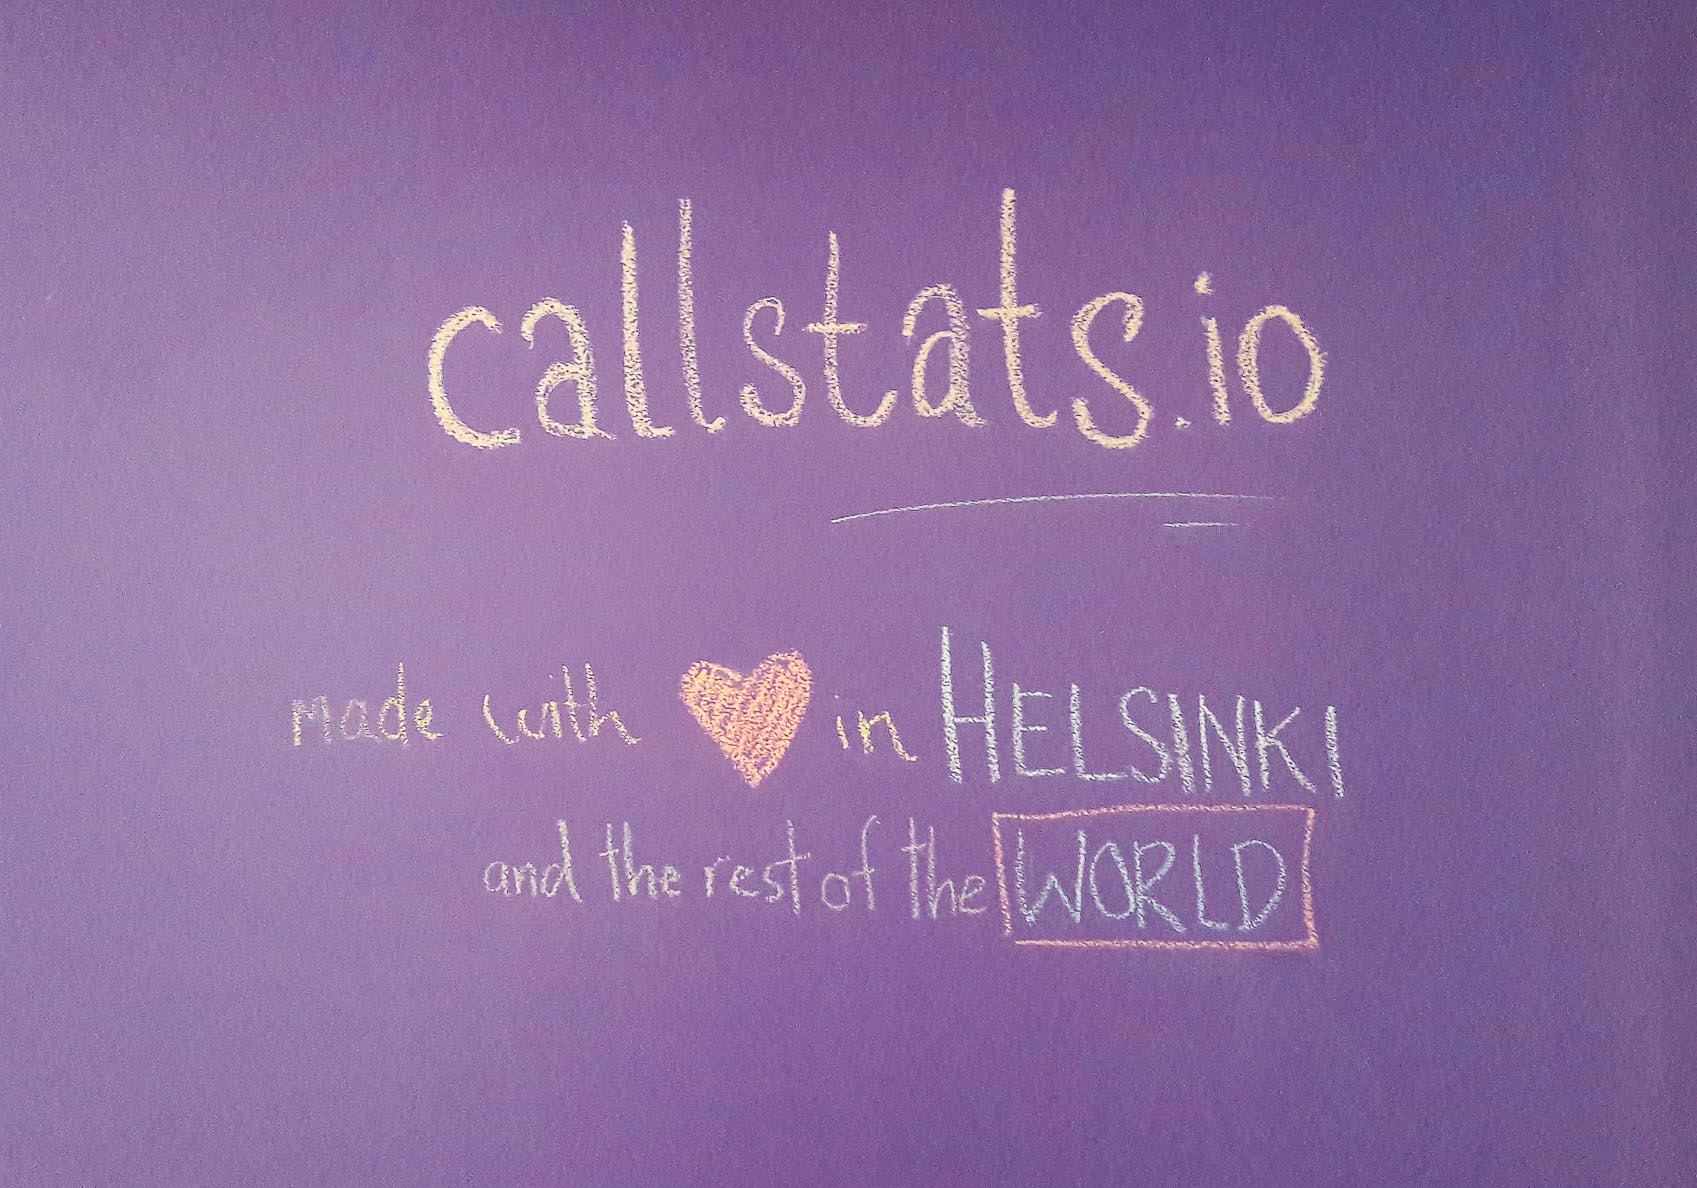 callstats.io: made with heart in helsinki and the rest of the world.